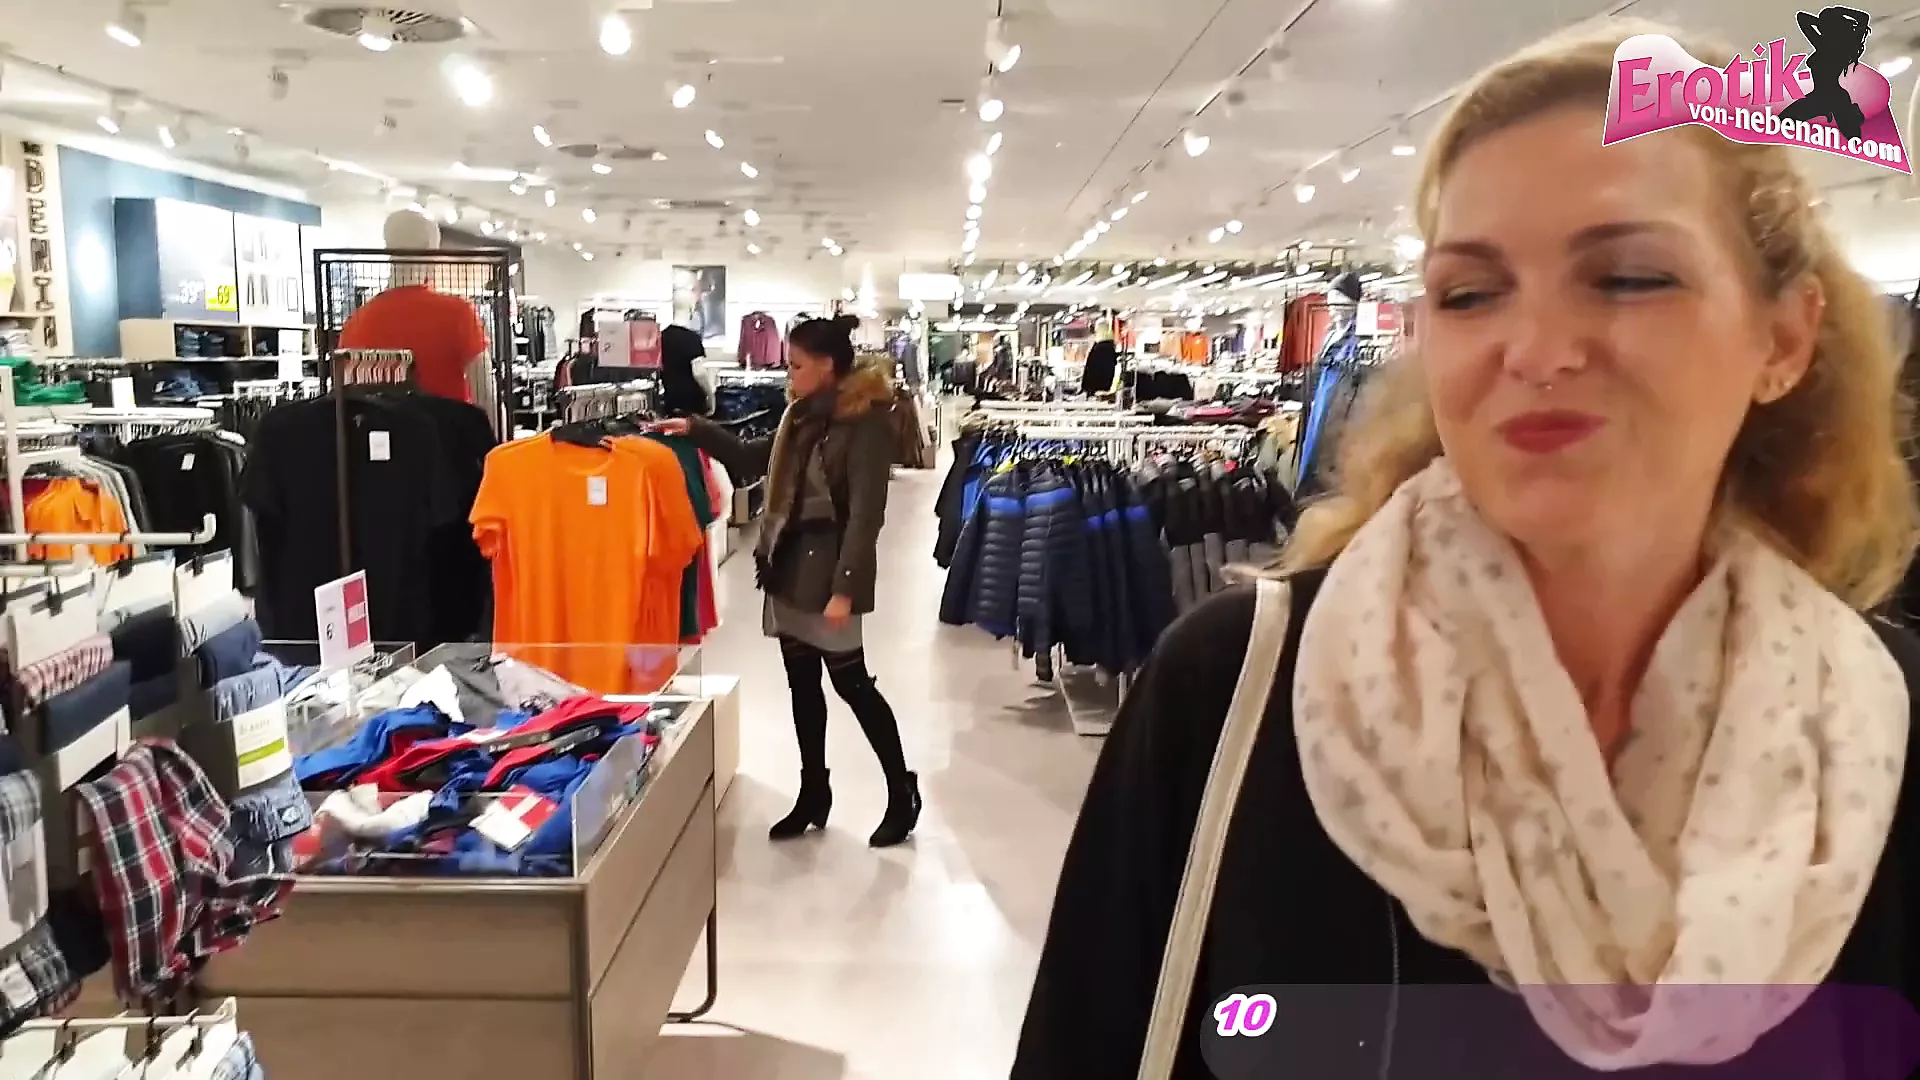 THREESOME CUM WALK IN SHOPPING CENTER AFTER Changing room image